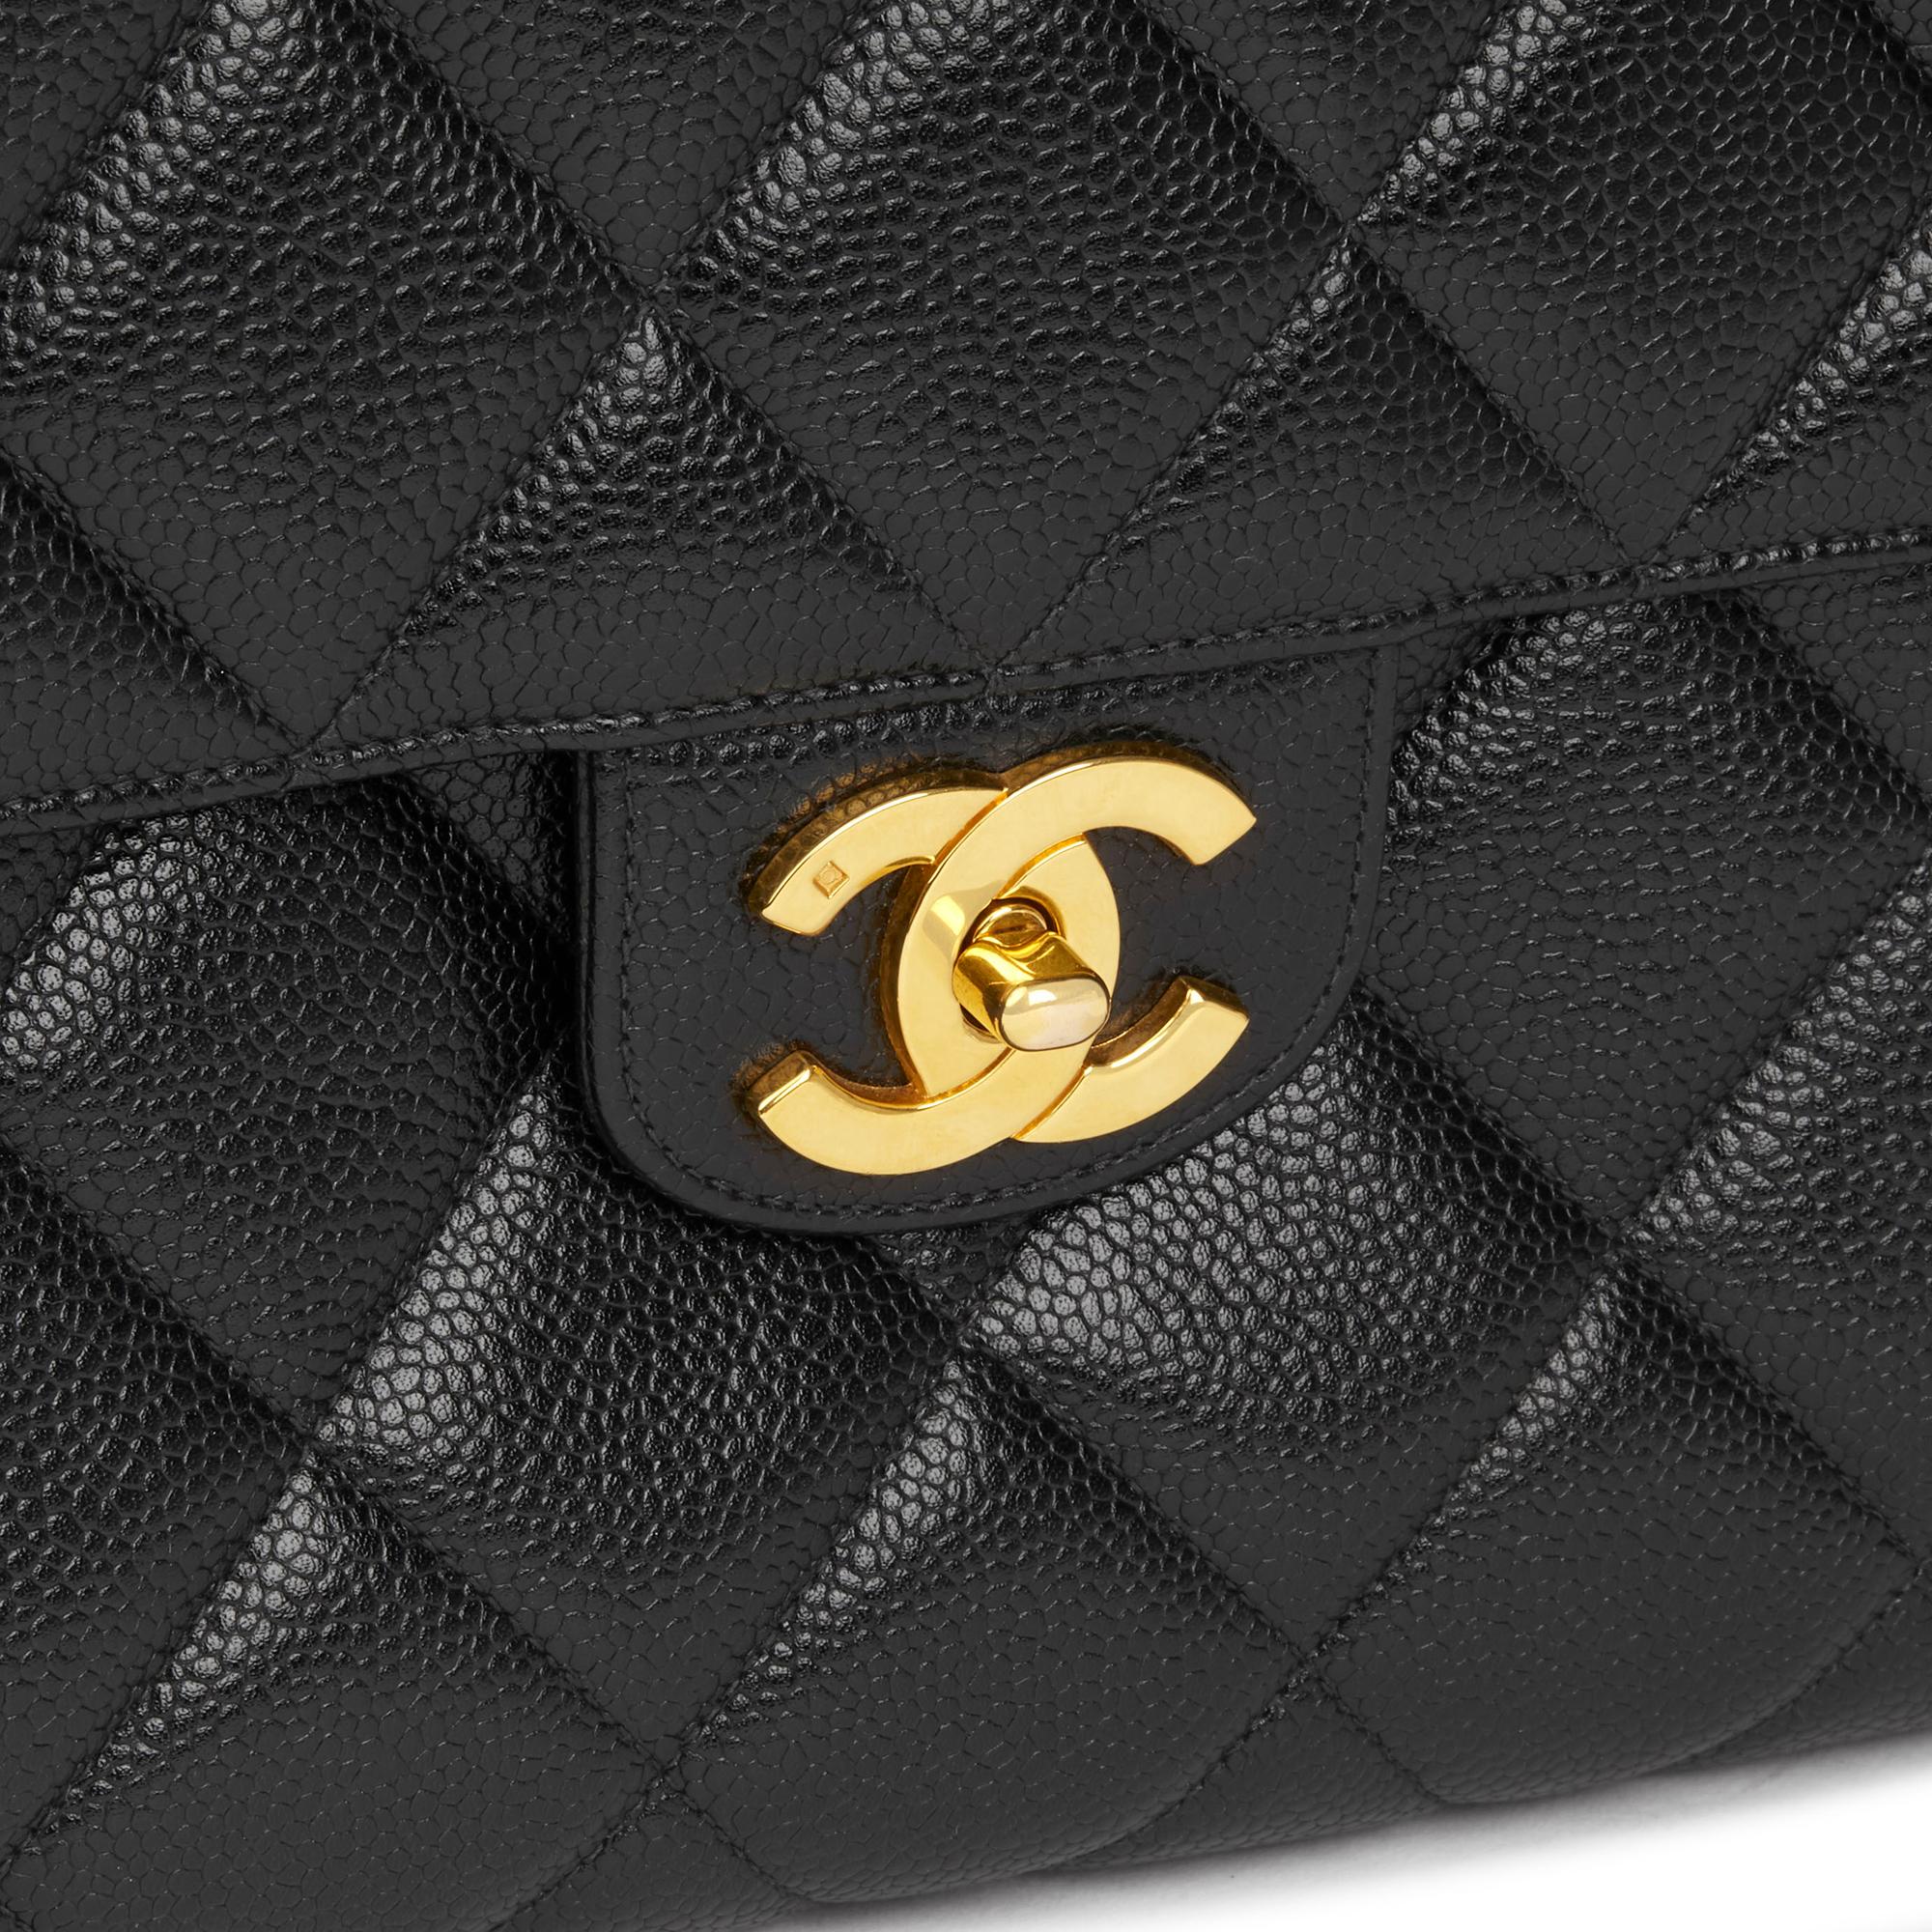 1993 Chanel Black Quilted Caviar Leather Vintage Classic Kelly 2